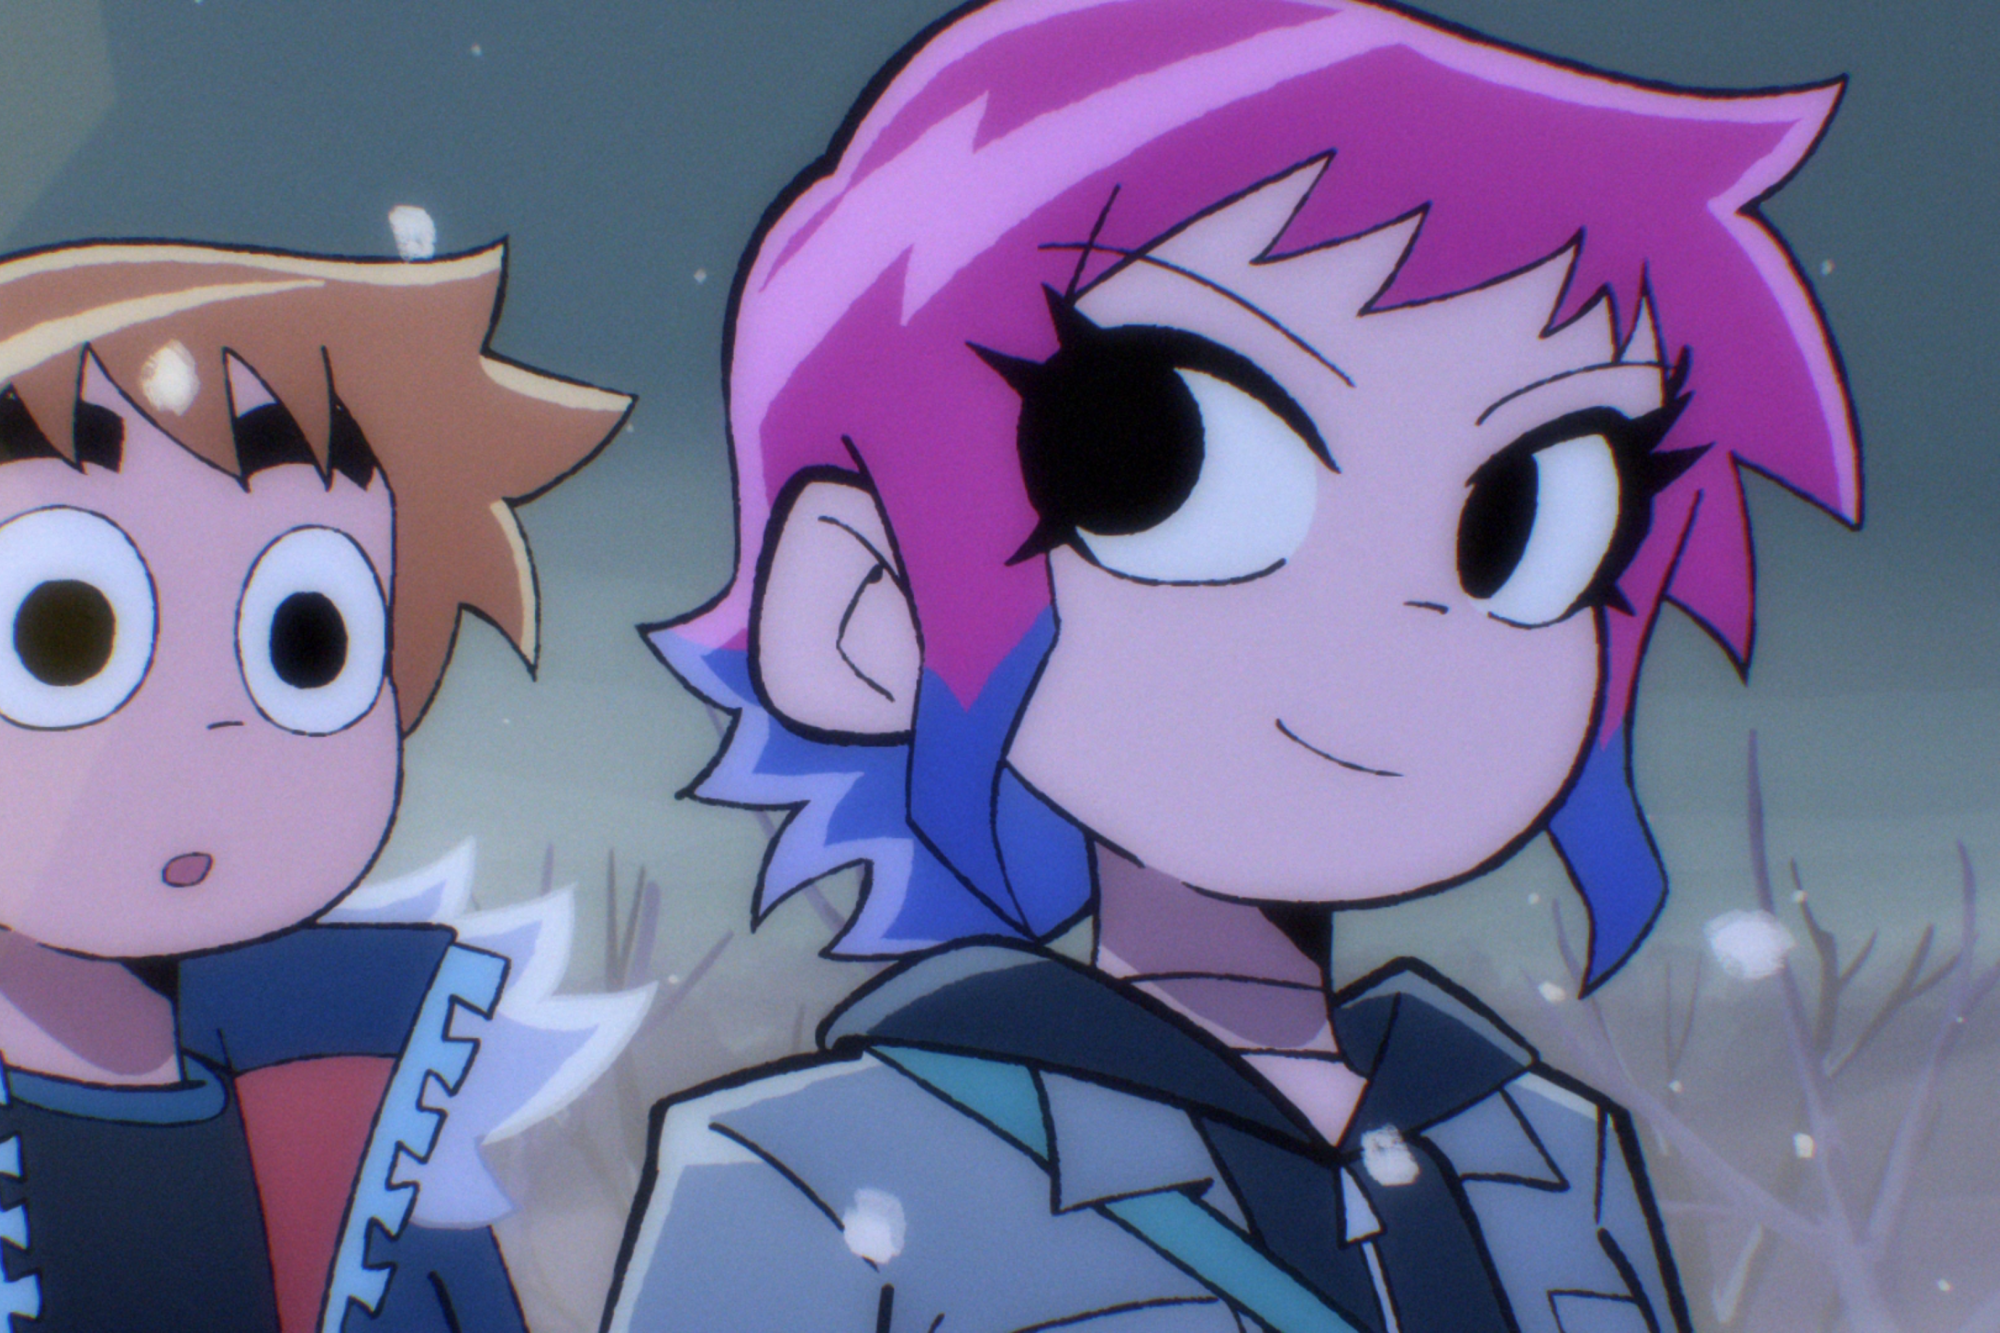 Scott Pilgrim Takes Off' is a 'new way of looking at the story,' creators  say - Los Angeles Times